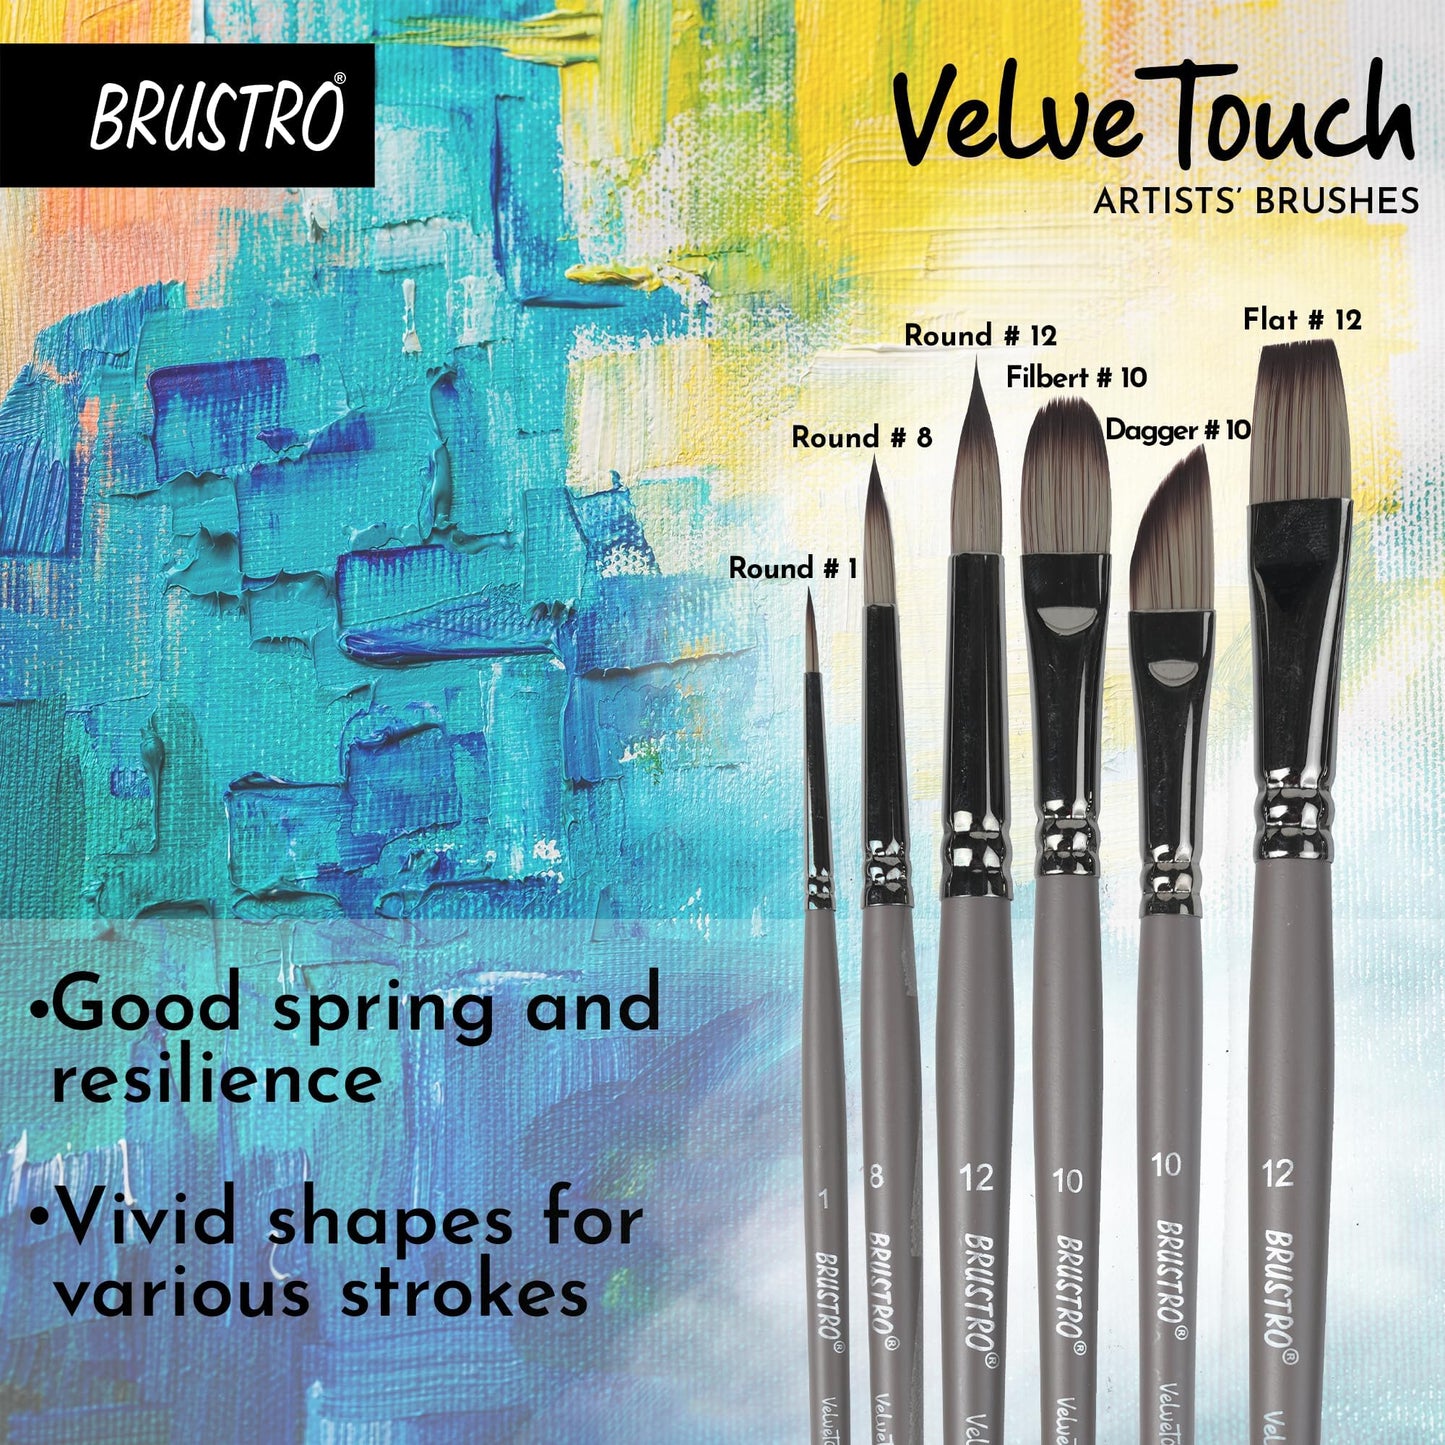 BRUSTRO Acrylic Paint Set of 24, Multicolour 12ml Tubes with Acrylic Papers 400 GSM A5, (Contains 18 + 6 Free Sheets) and VelveTouch Artist Brushes set of 6